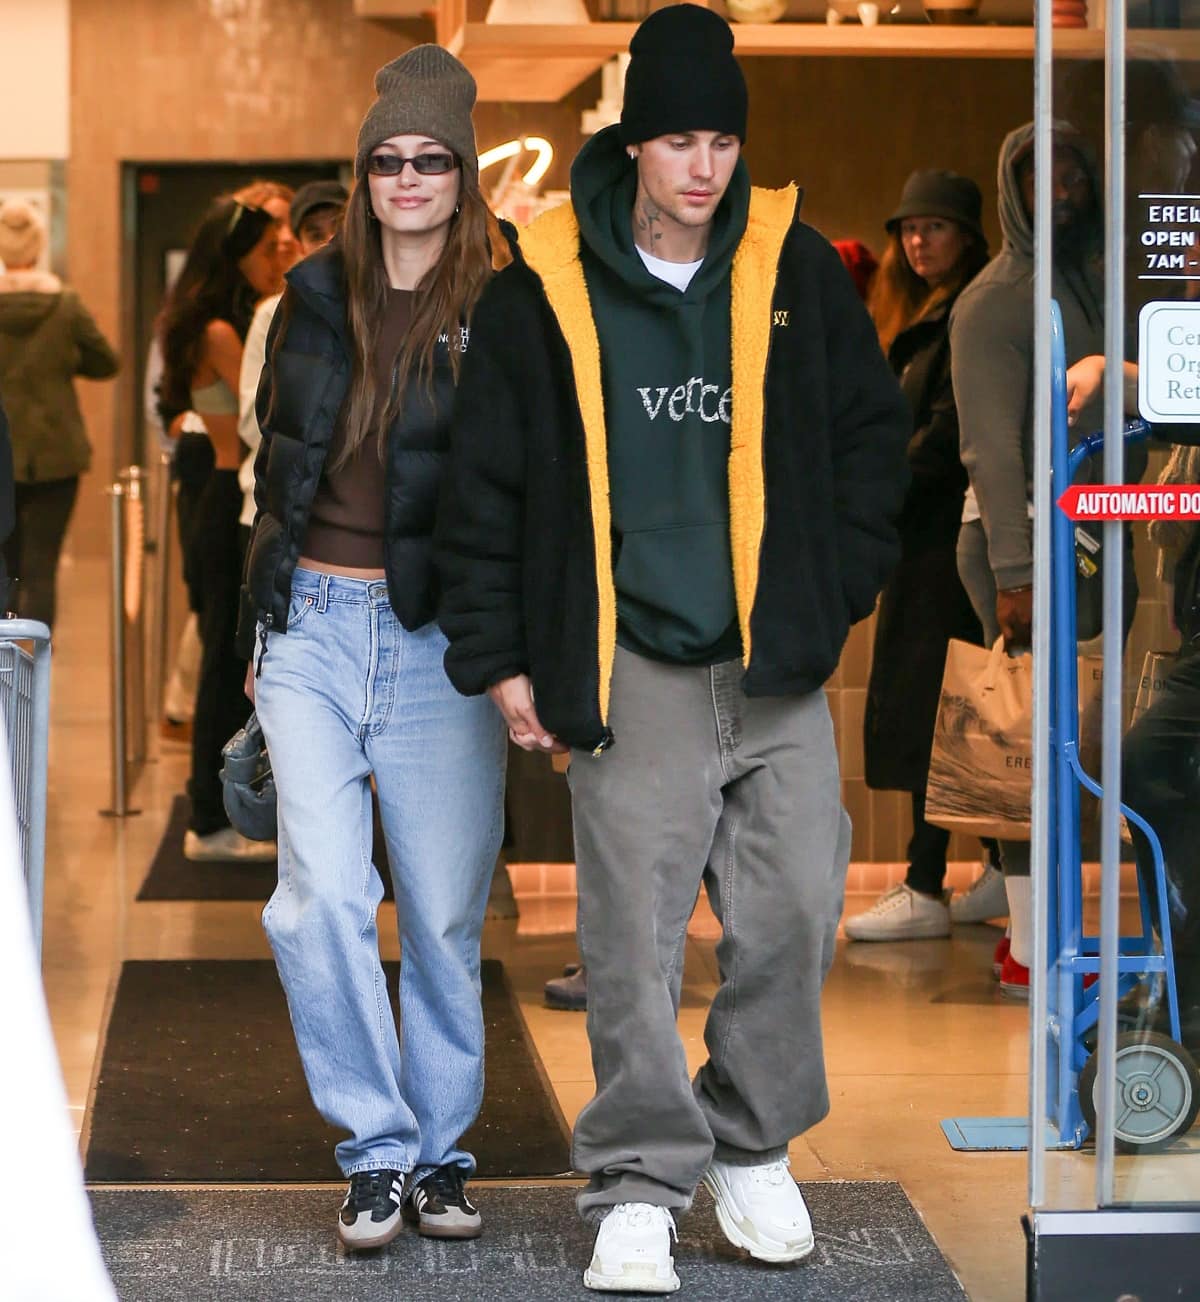 Hailey Bieber and Justin Bieber grocery shopping at Erewhon